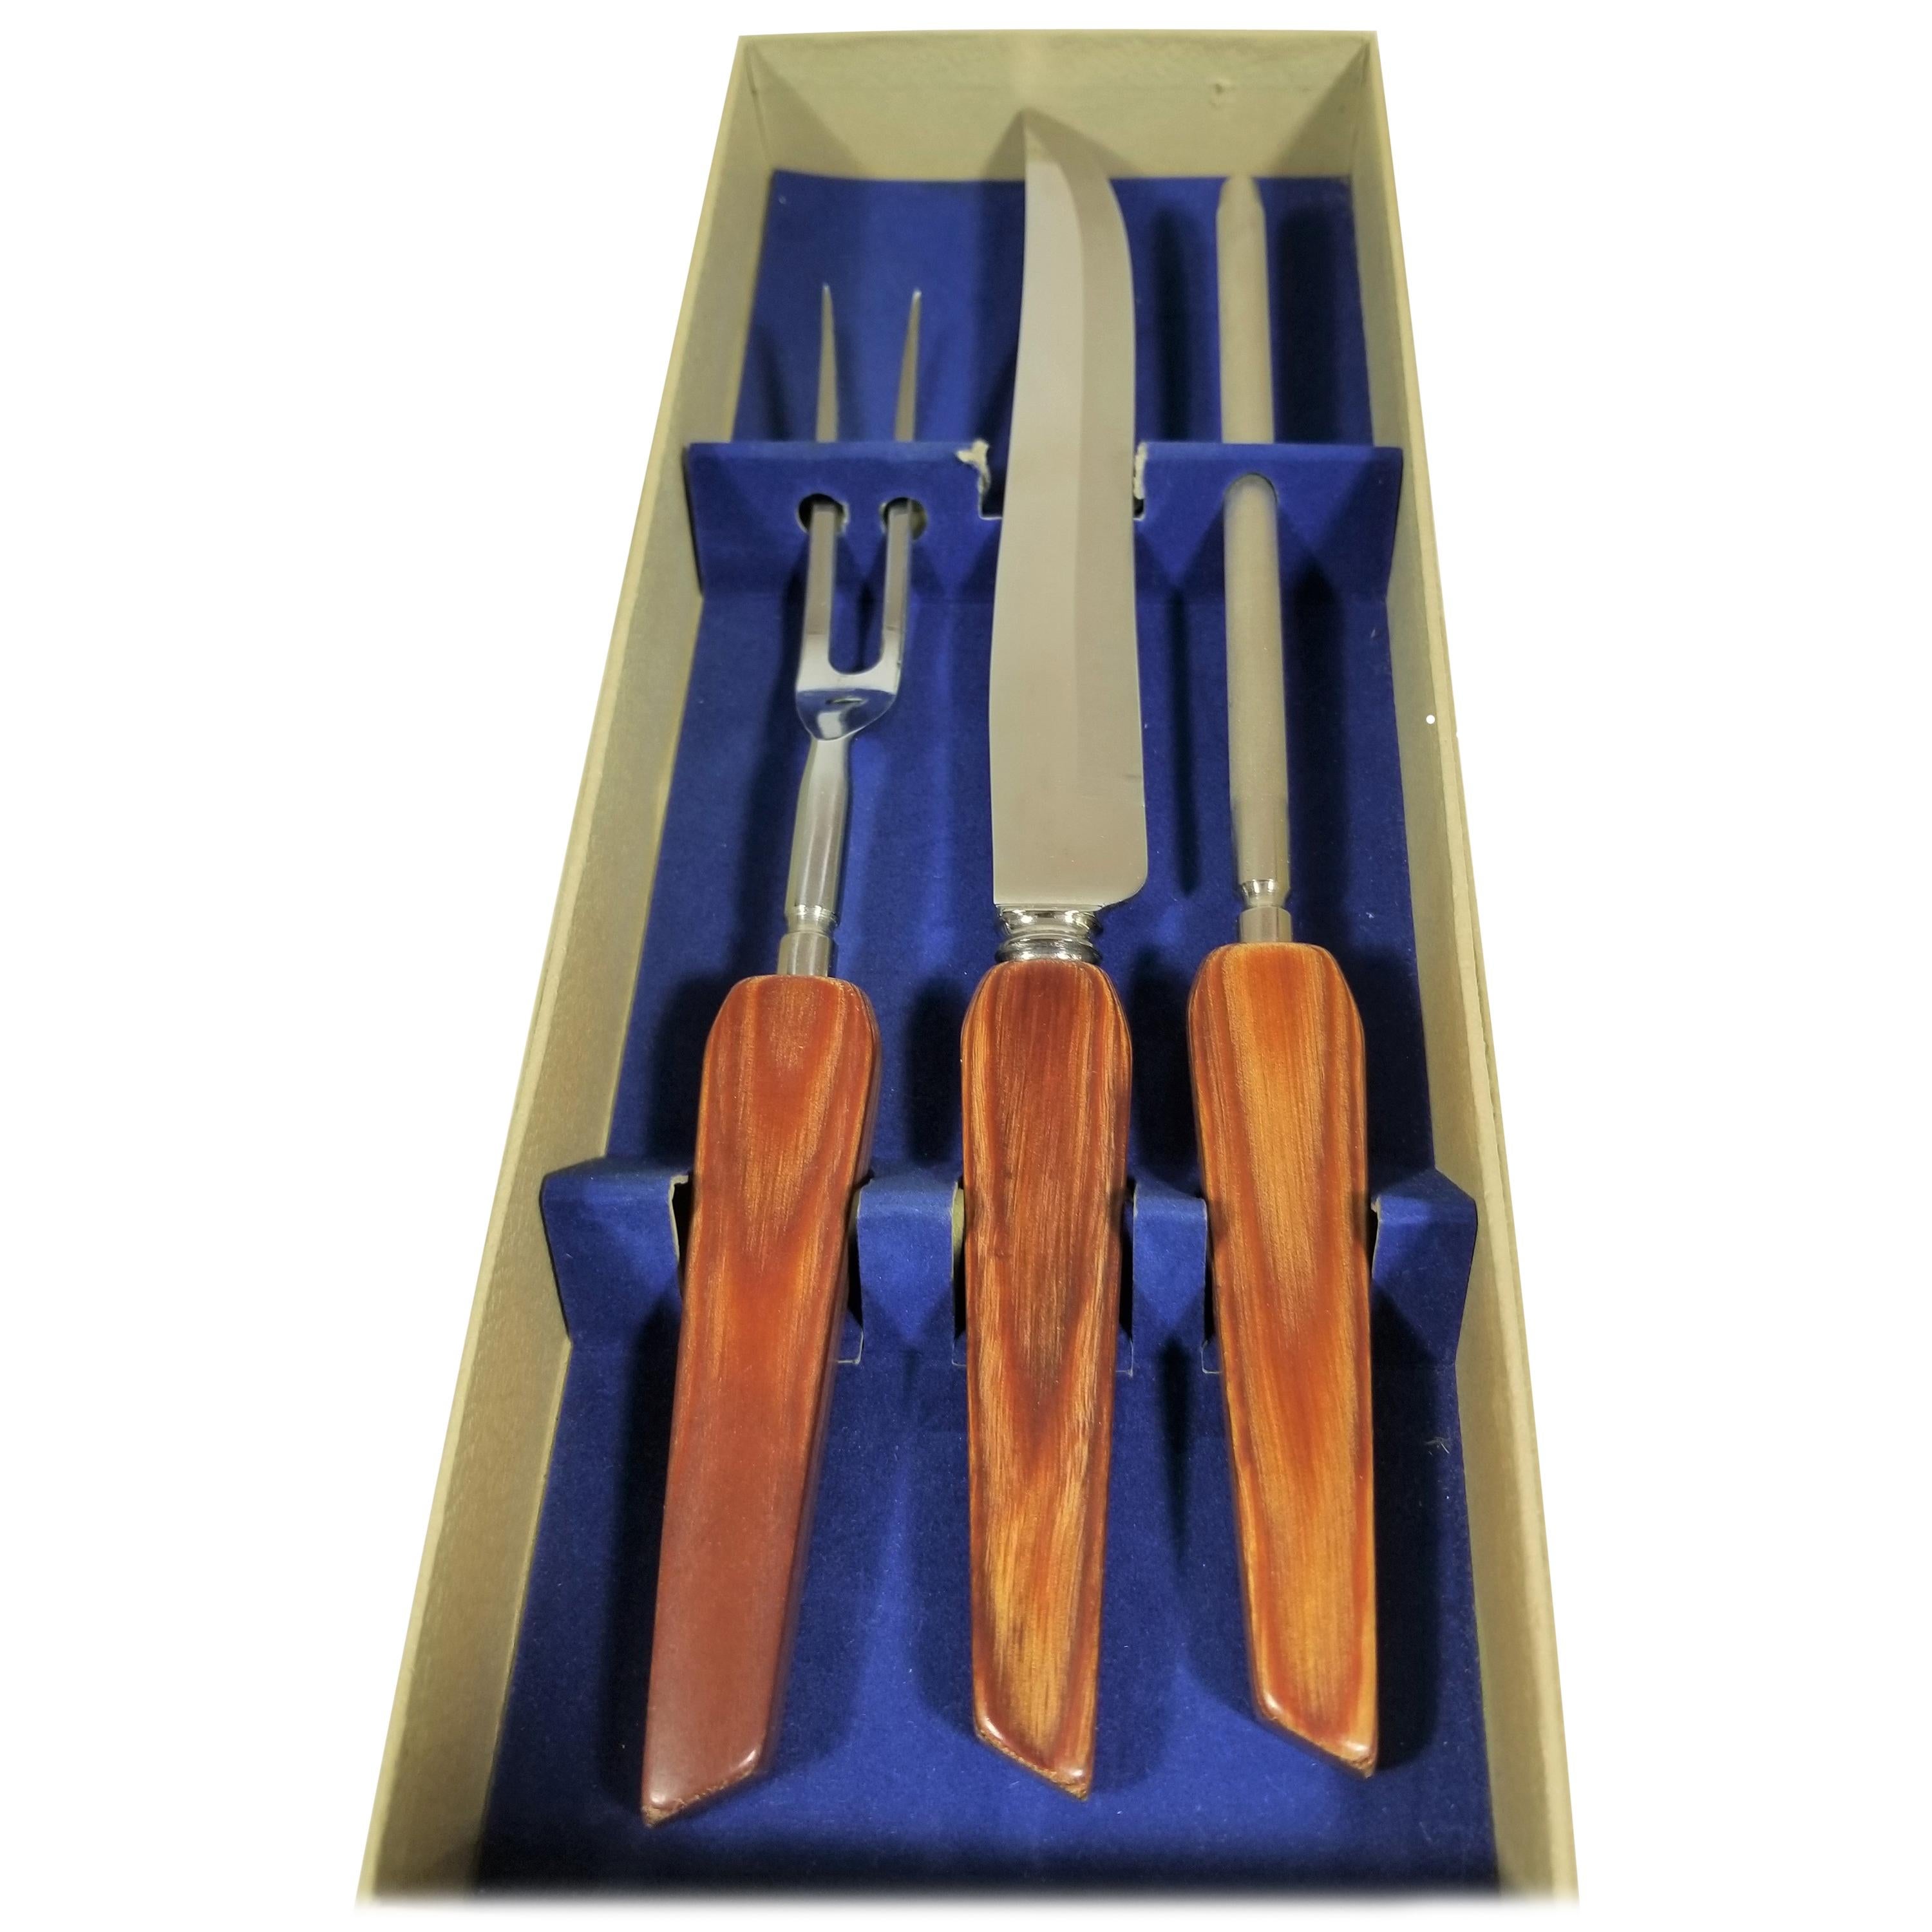 Sheffield England Rosewood 3 Piece Carving or Cutlery Set